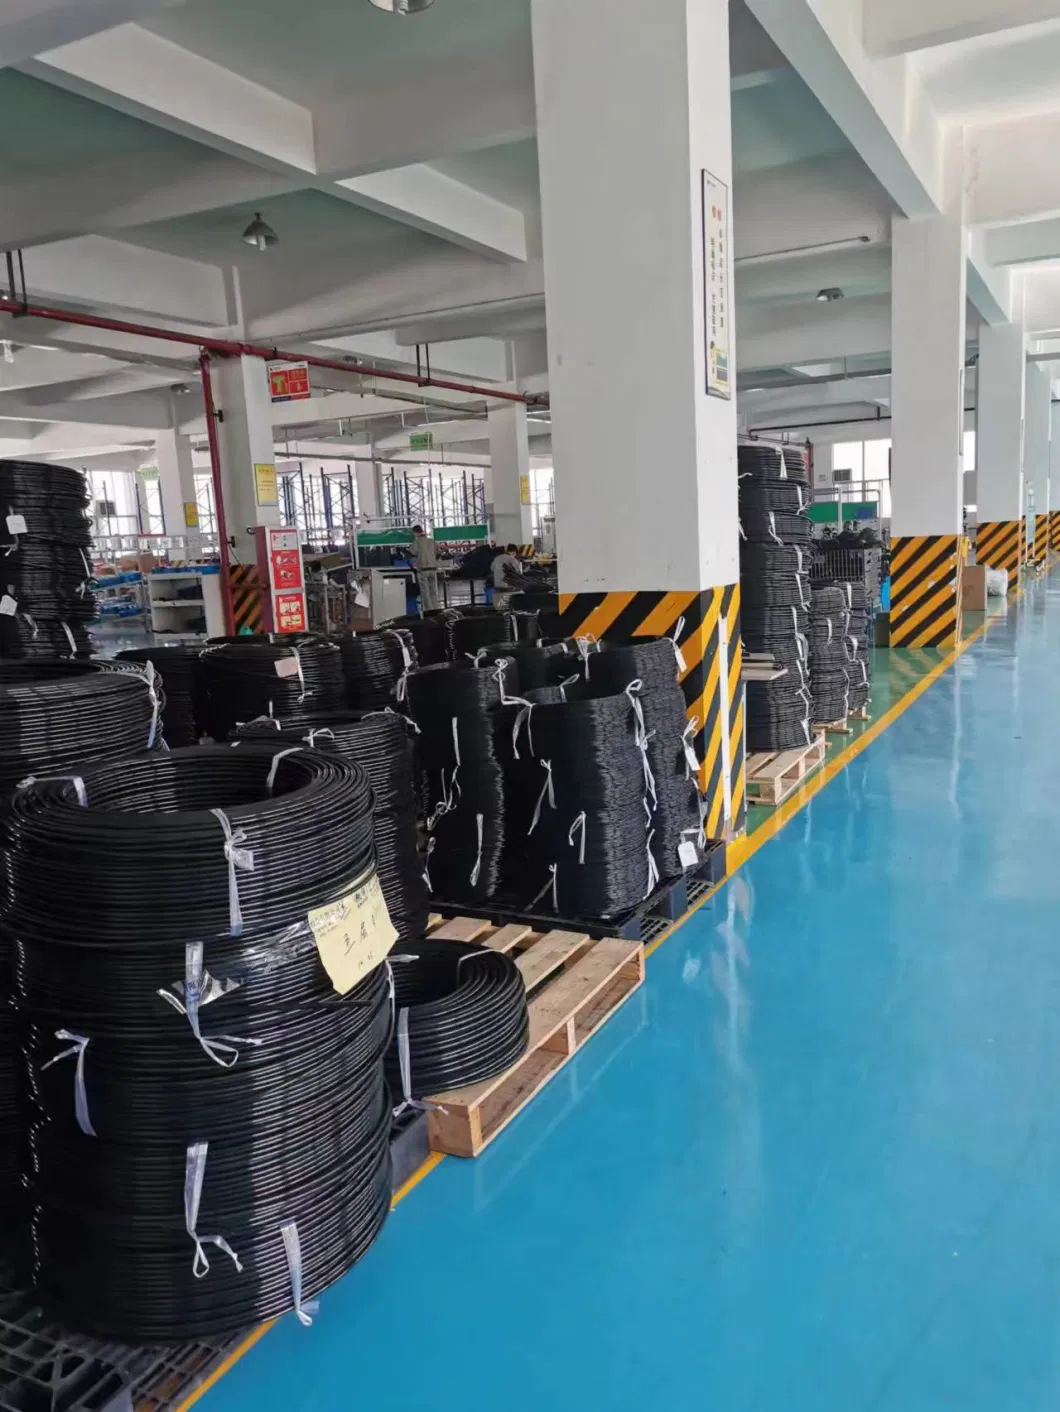 Rubber Discharge Oil Hose